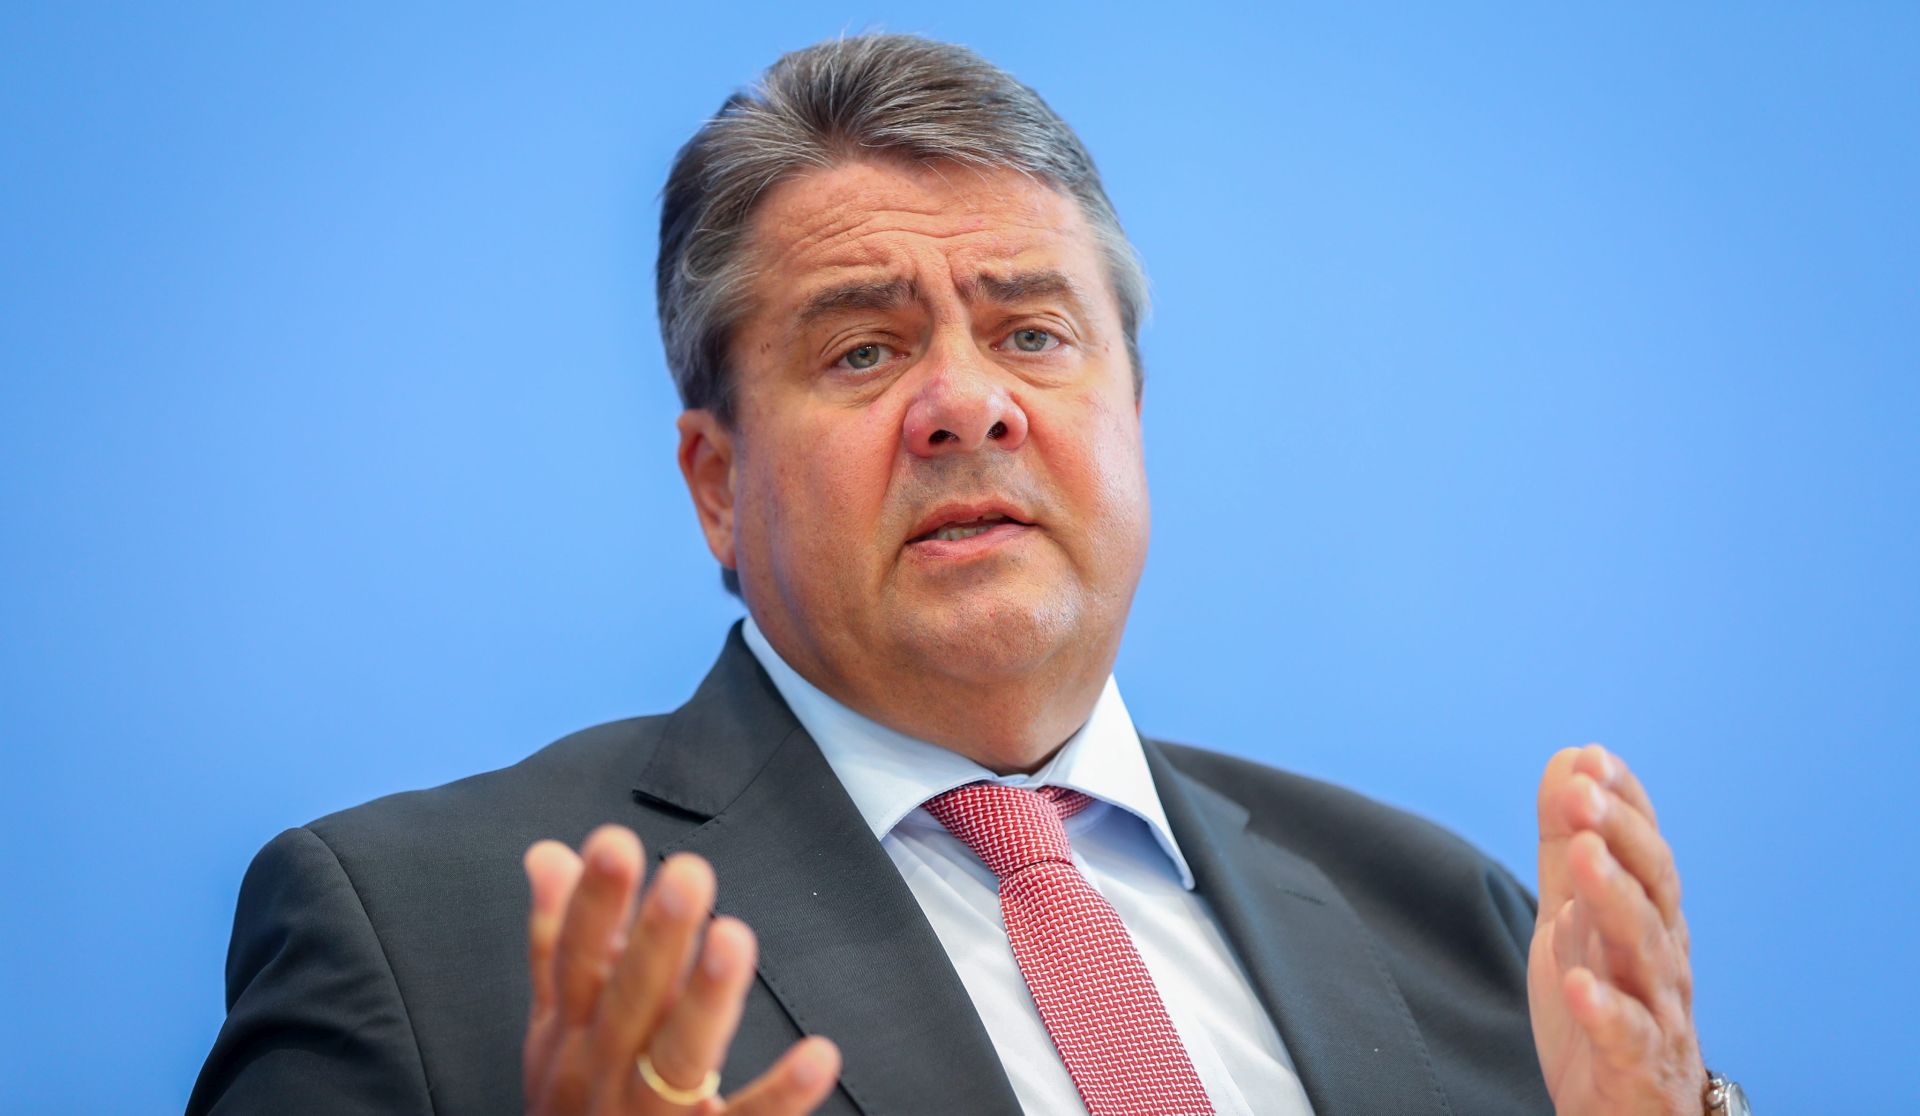 epa05515218 German Business Secretary Sigmar Gabriel speaks at a press conference about the agreement on the energy package and the free trade agreements TTIP and CETA in Berlin, Germany, 30 August 2016.  EPA/KAY NIETFELD